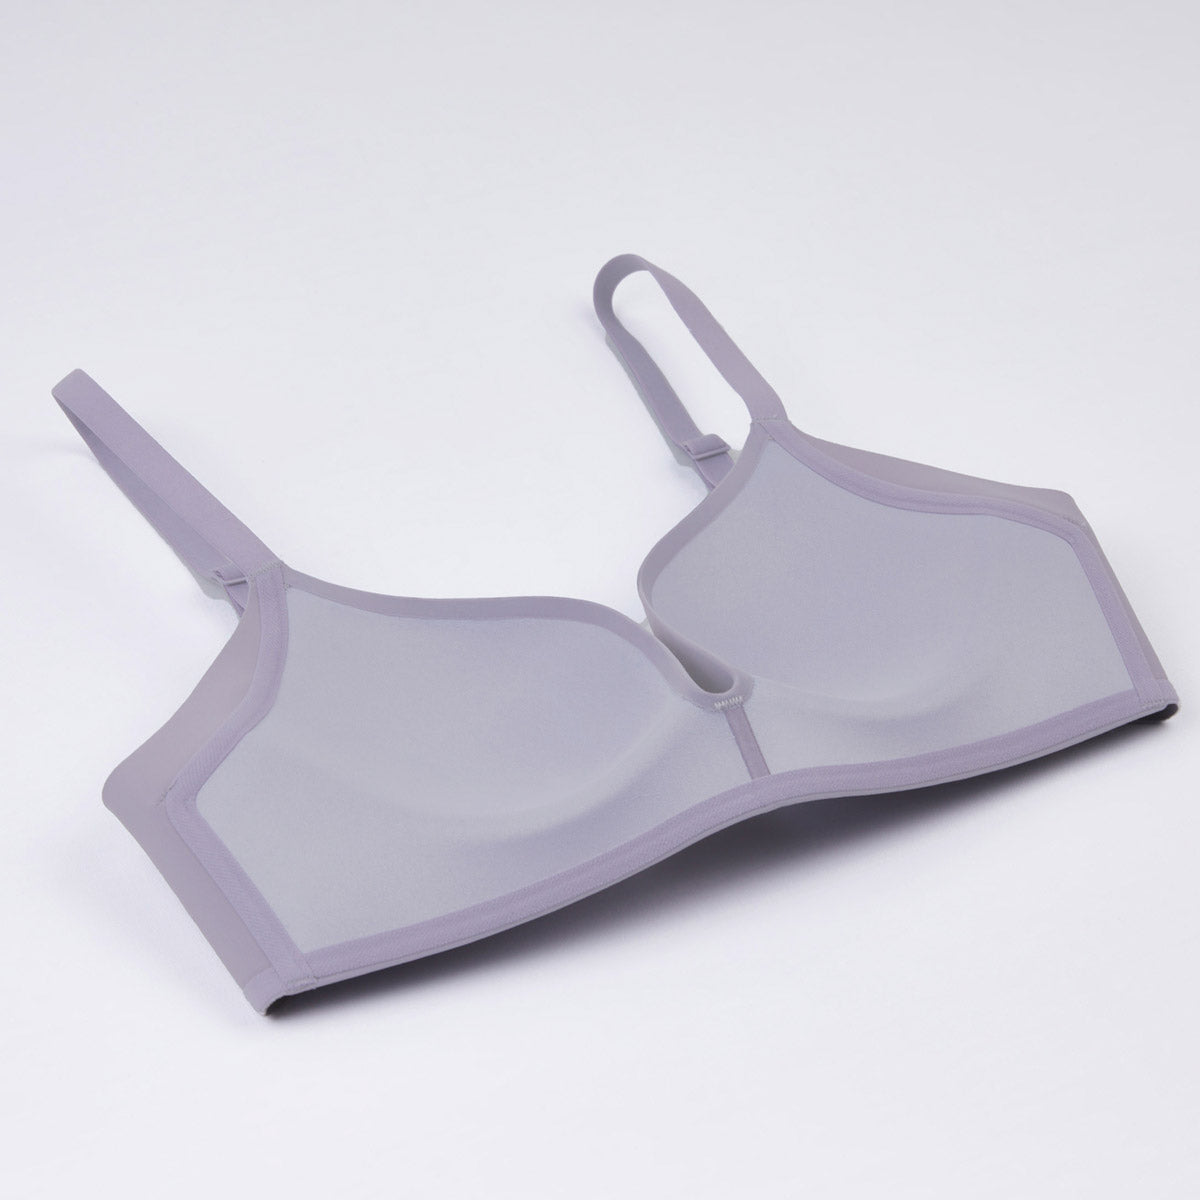 Solution Non wired Push Up Bra Bra Her Own Words 